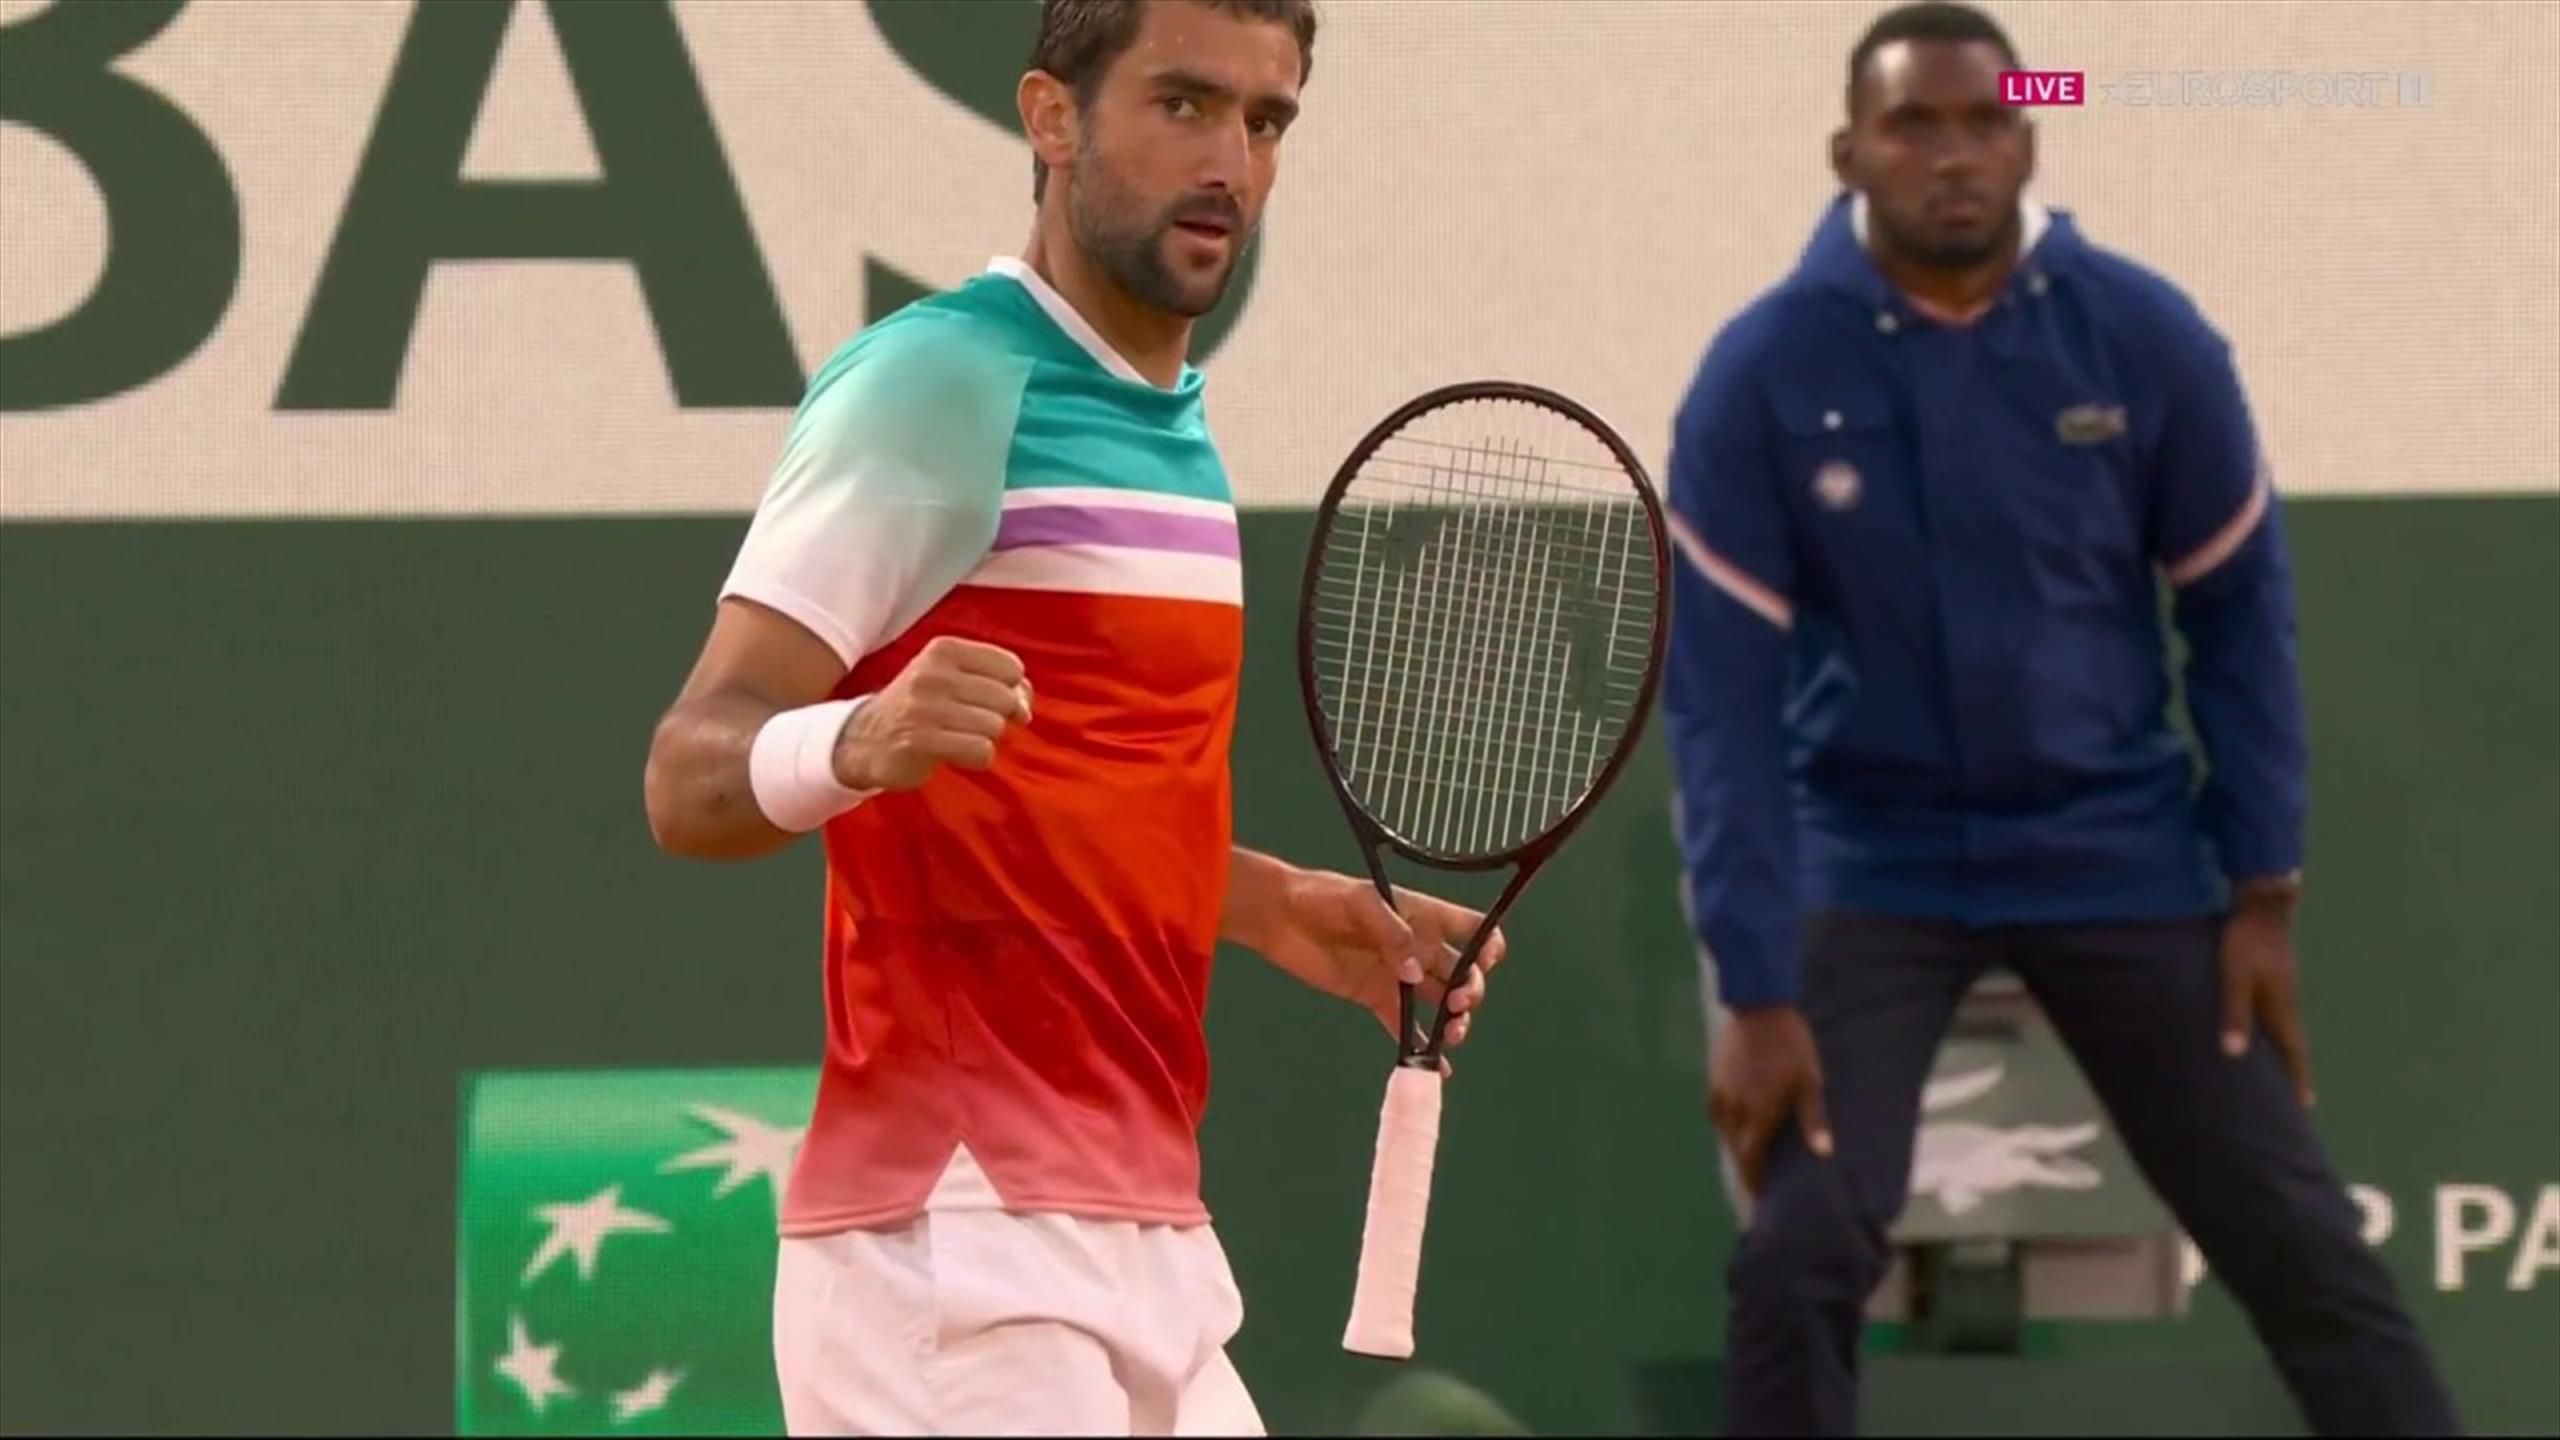 French Open 2022 Too good! - Marin Cilic hits monster forehand against Daniil Medvedev - Tennis video